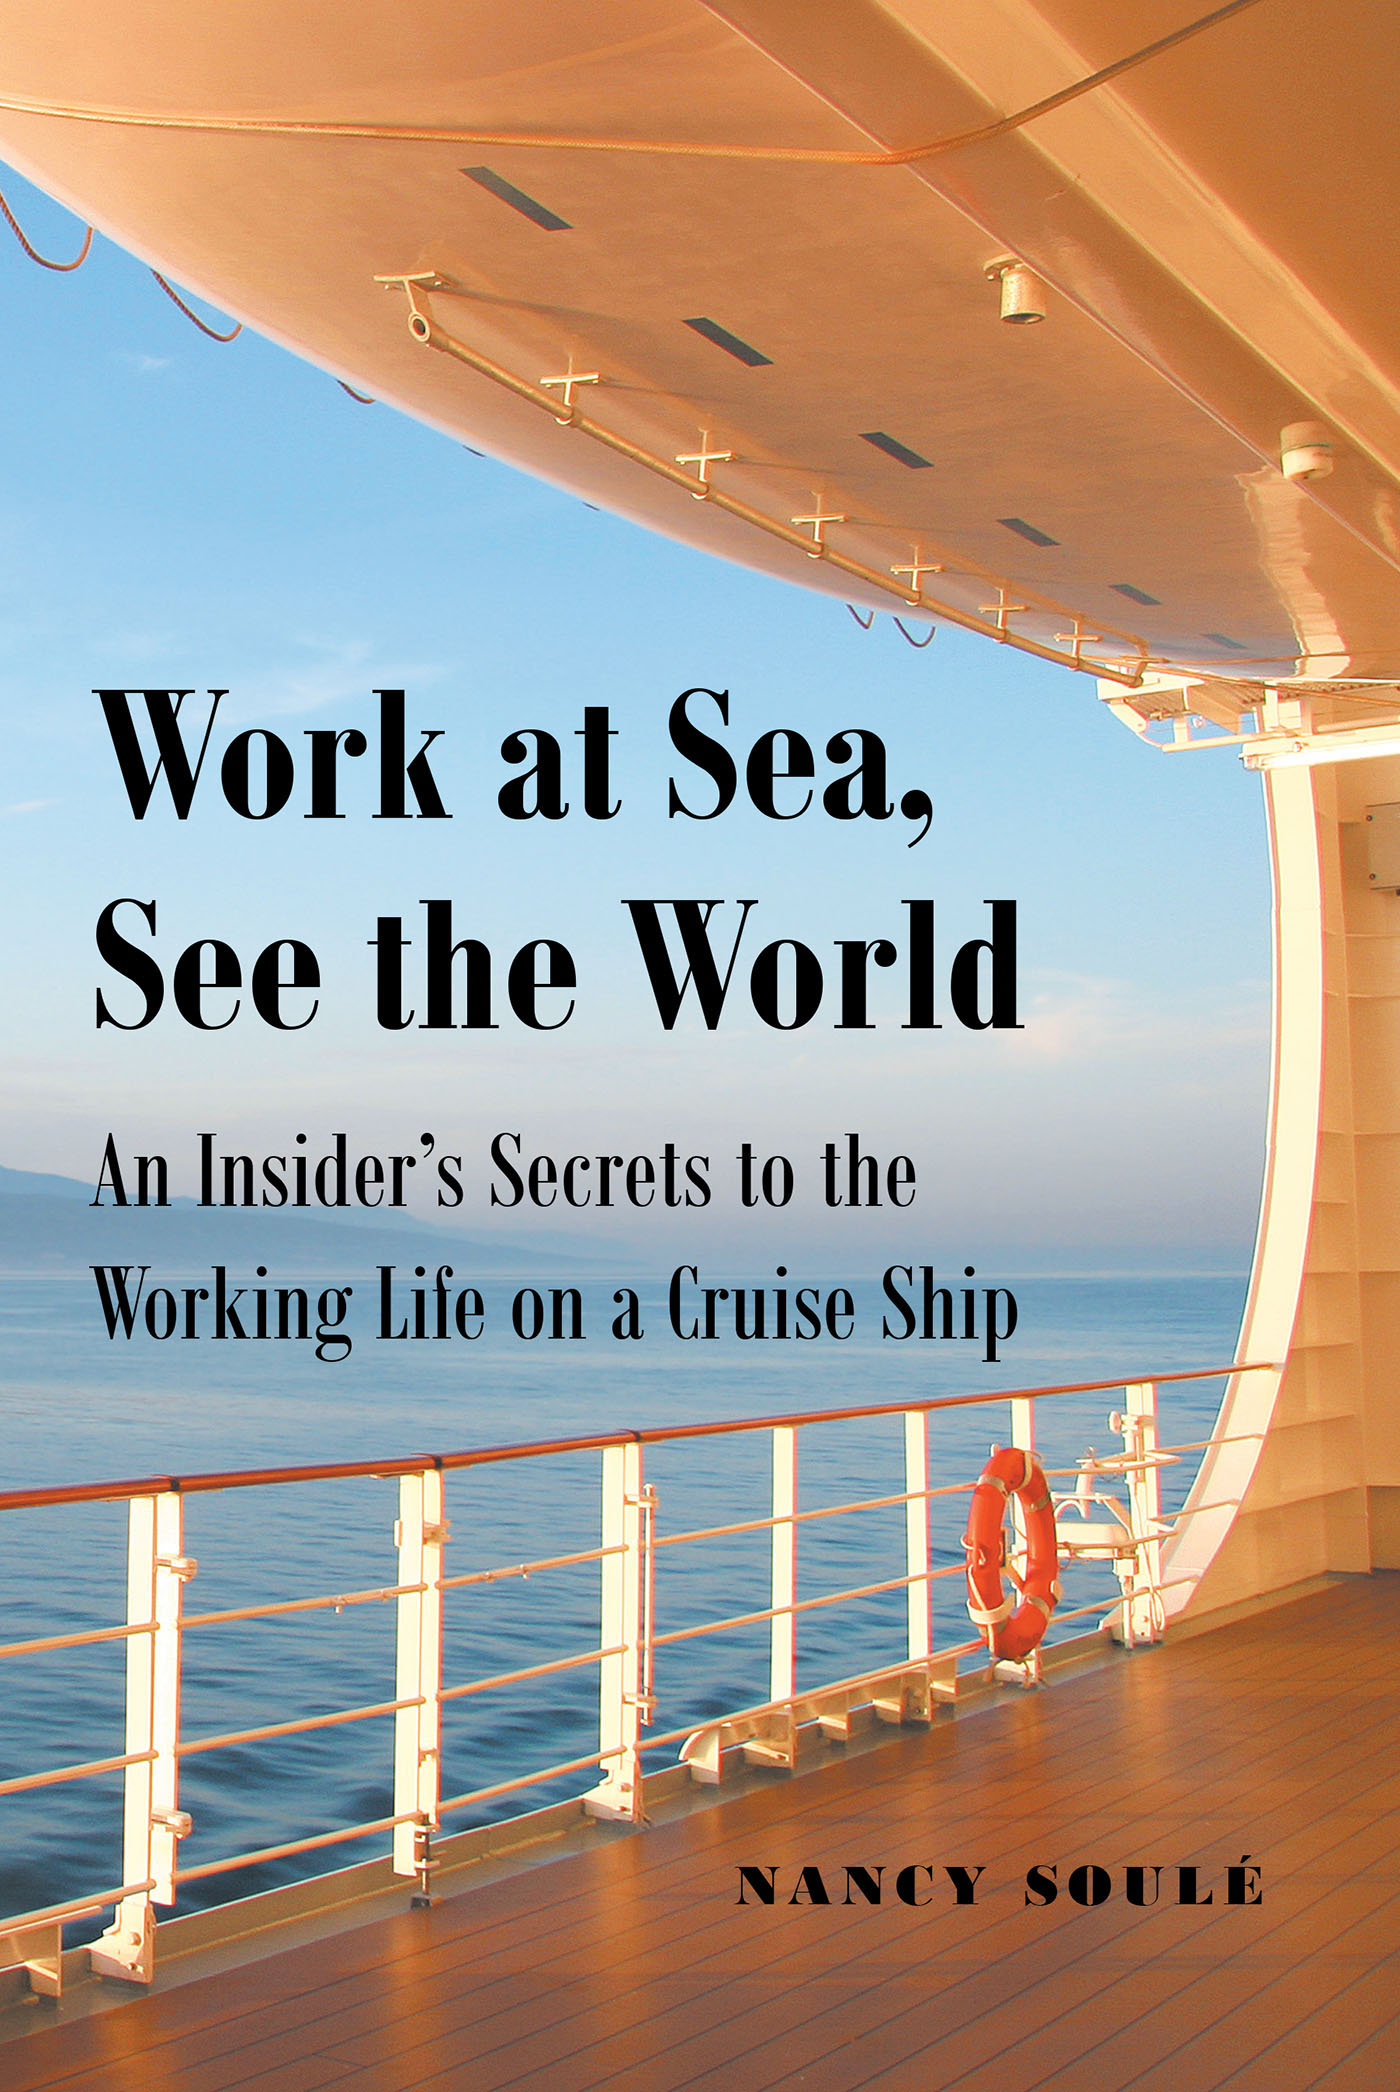 Author Nancy Soulé’s New Book, "Work at Sea, See the World," is an Insightful Tool for Readers Seeking to Understand What It Can be Like Working and Living at Sea